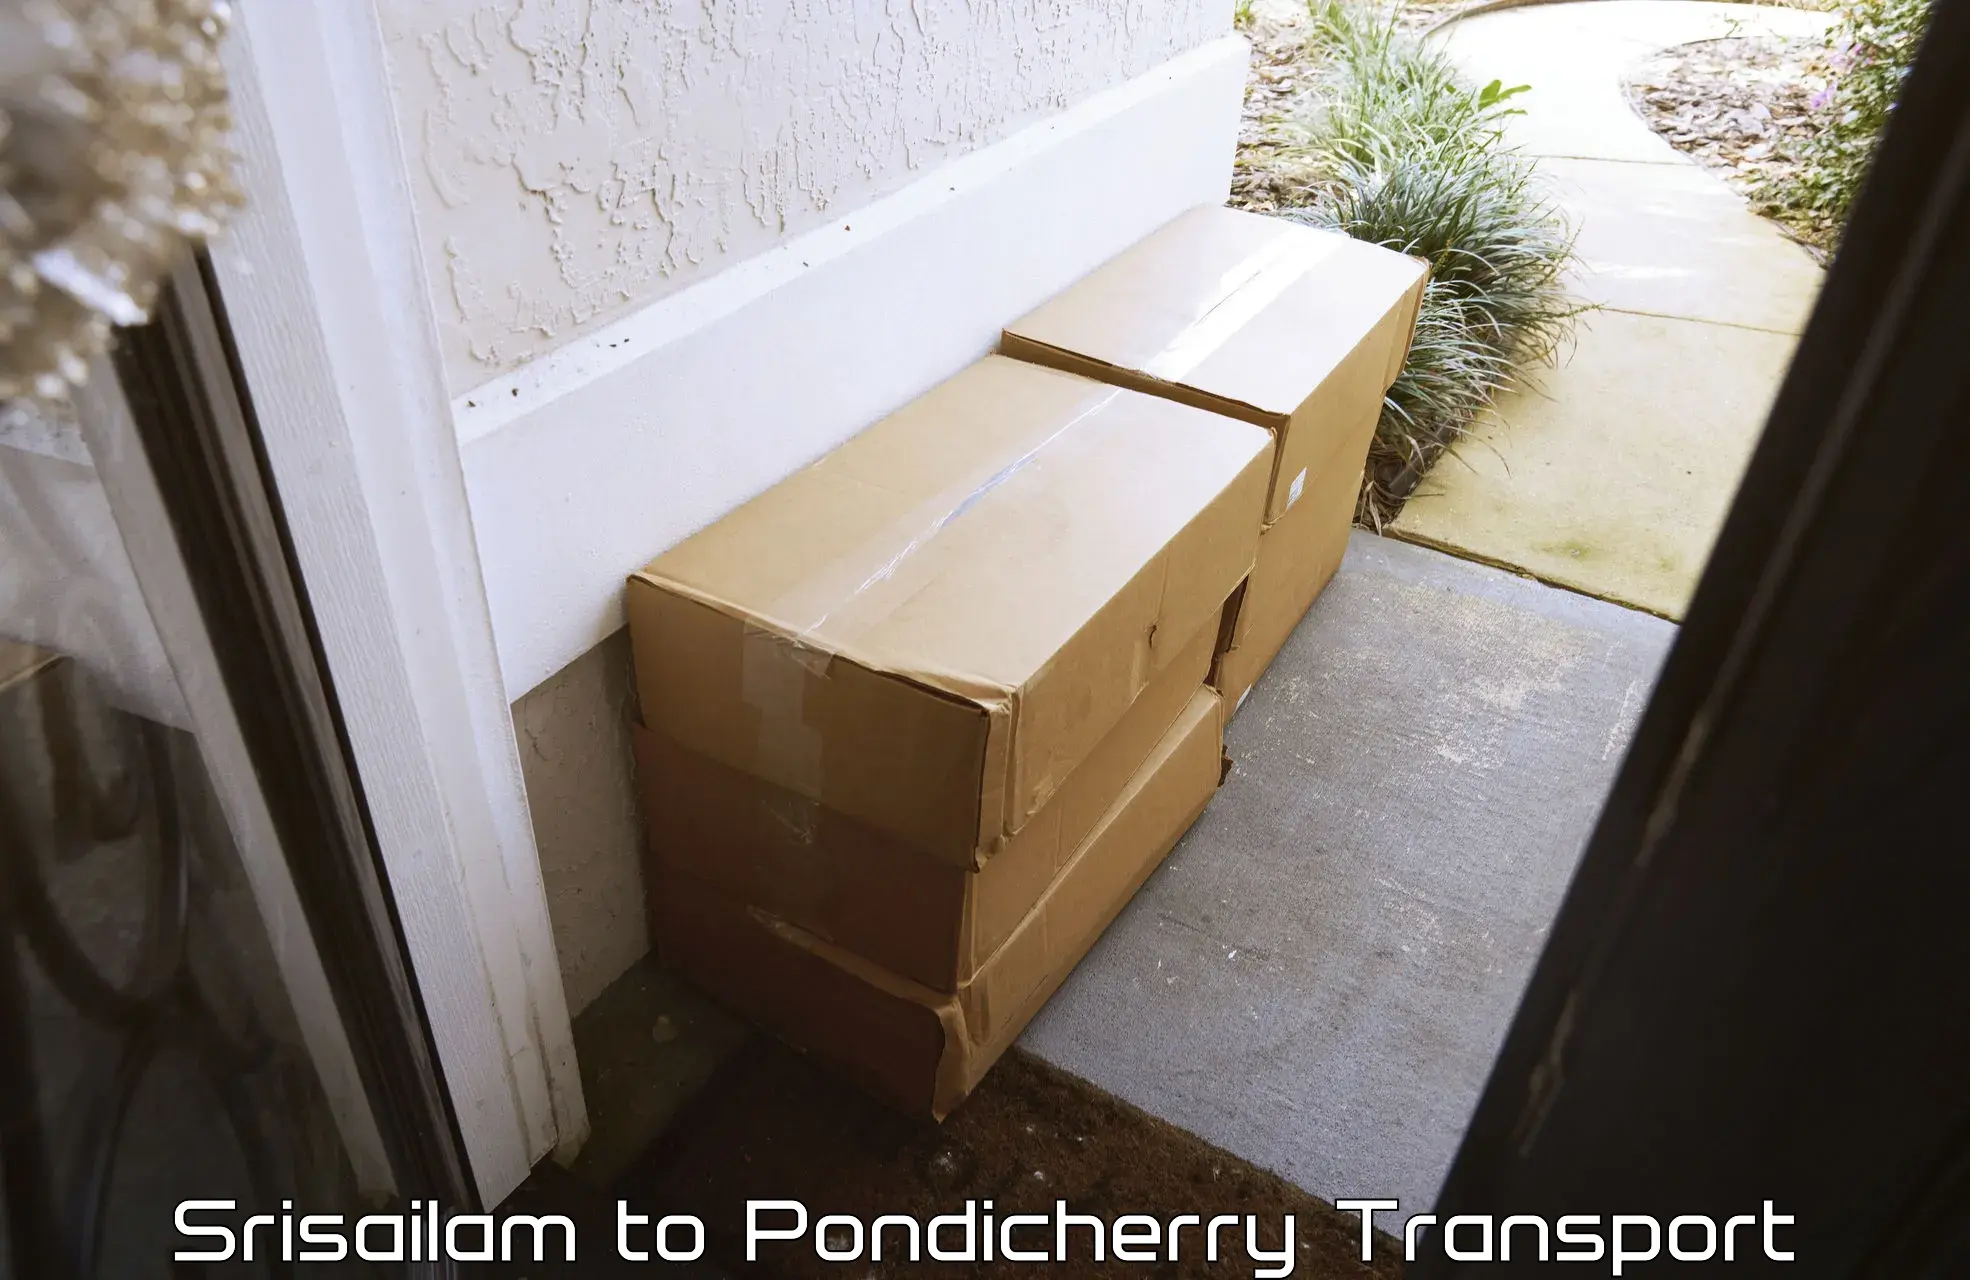 Goods delivery service Srisailam to Pondicherry